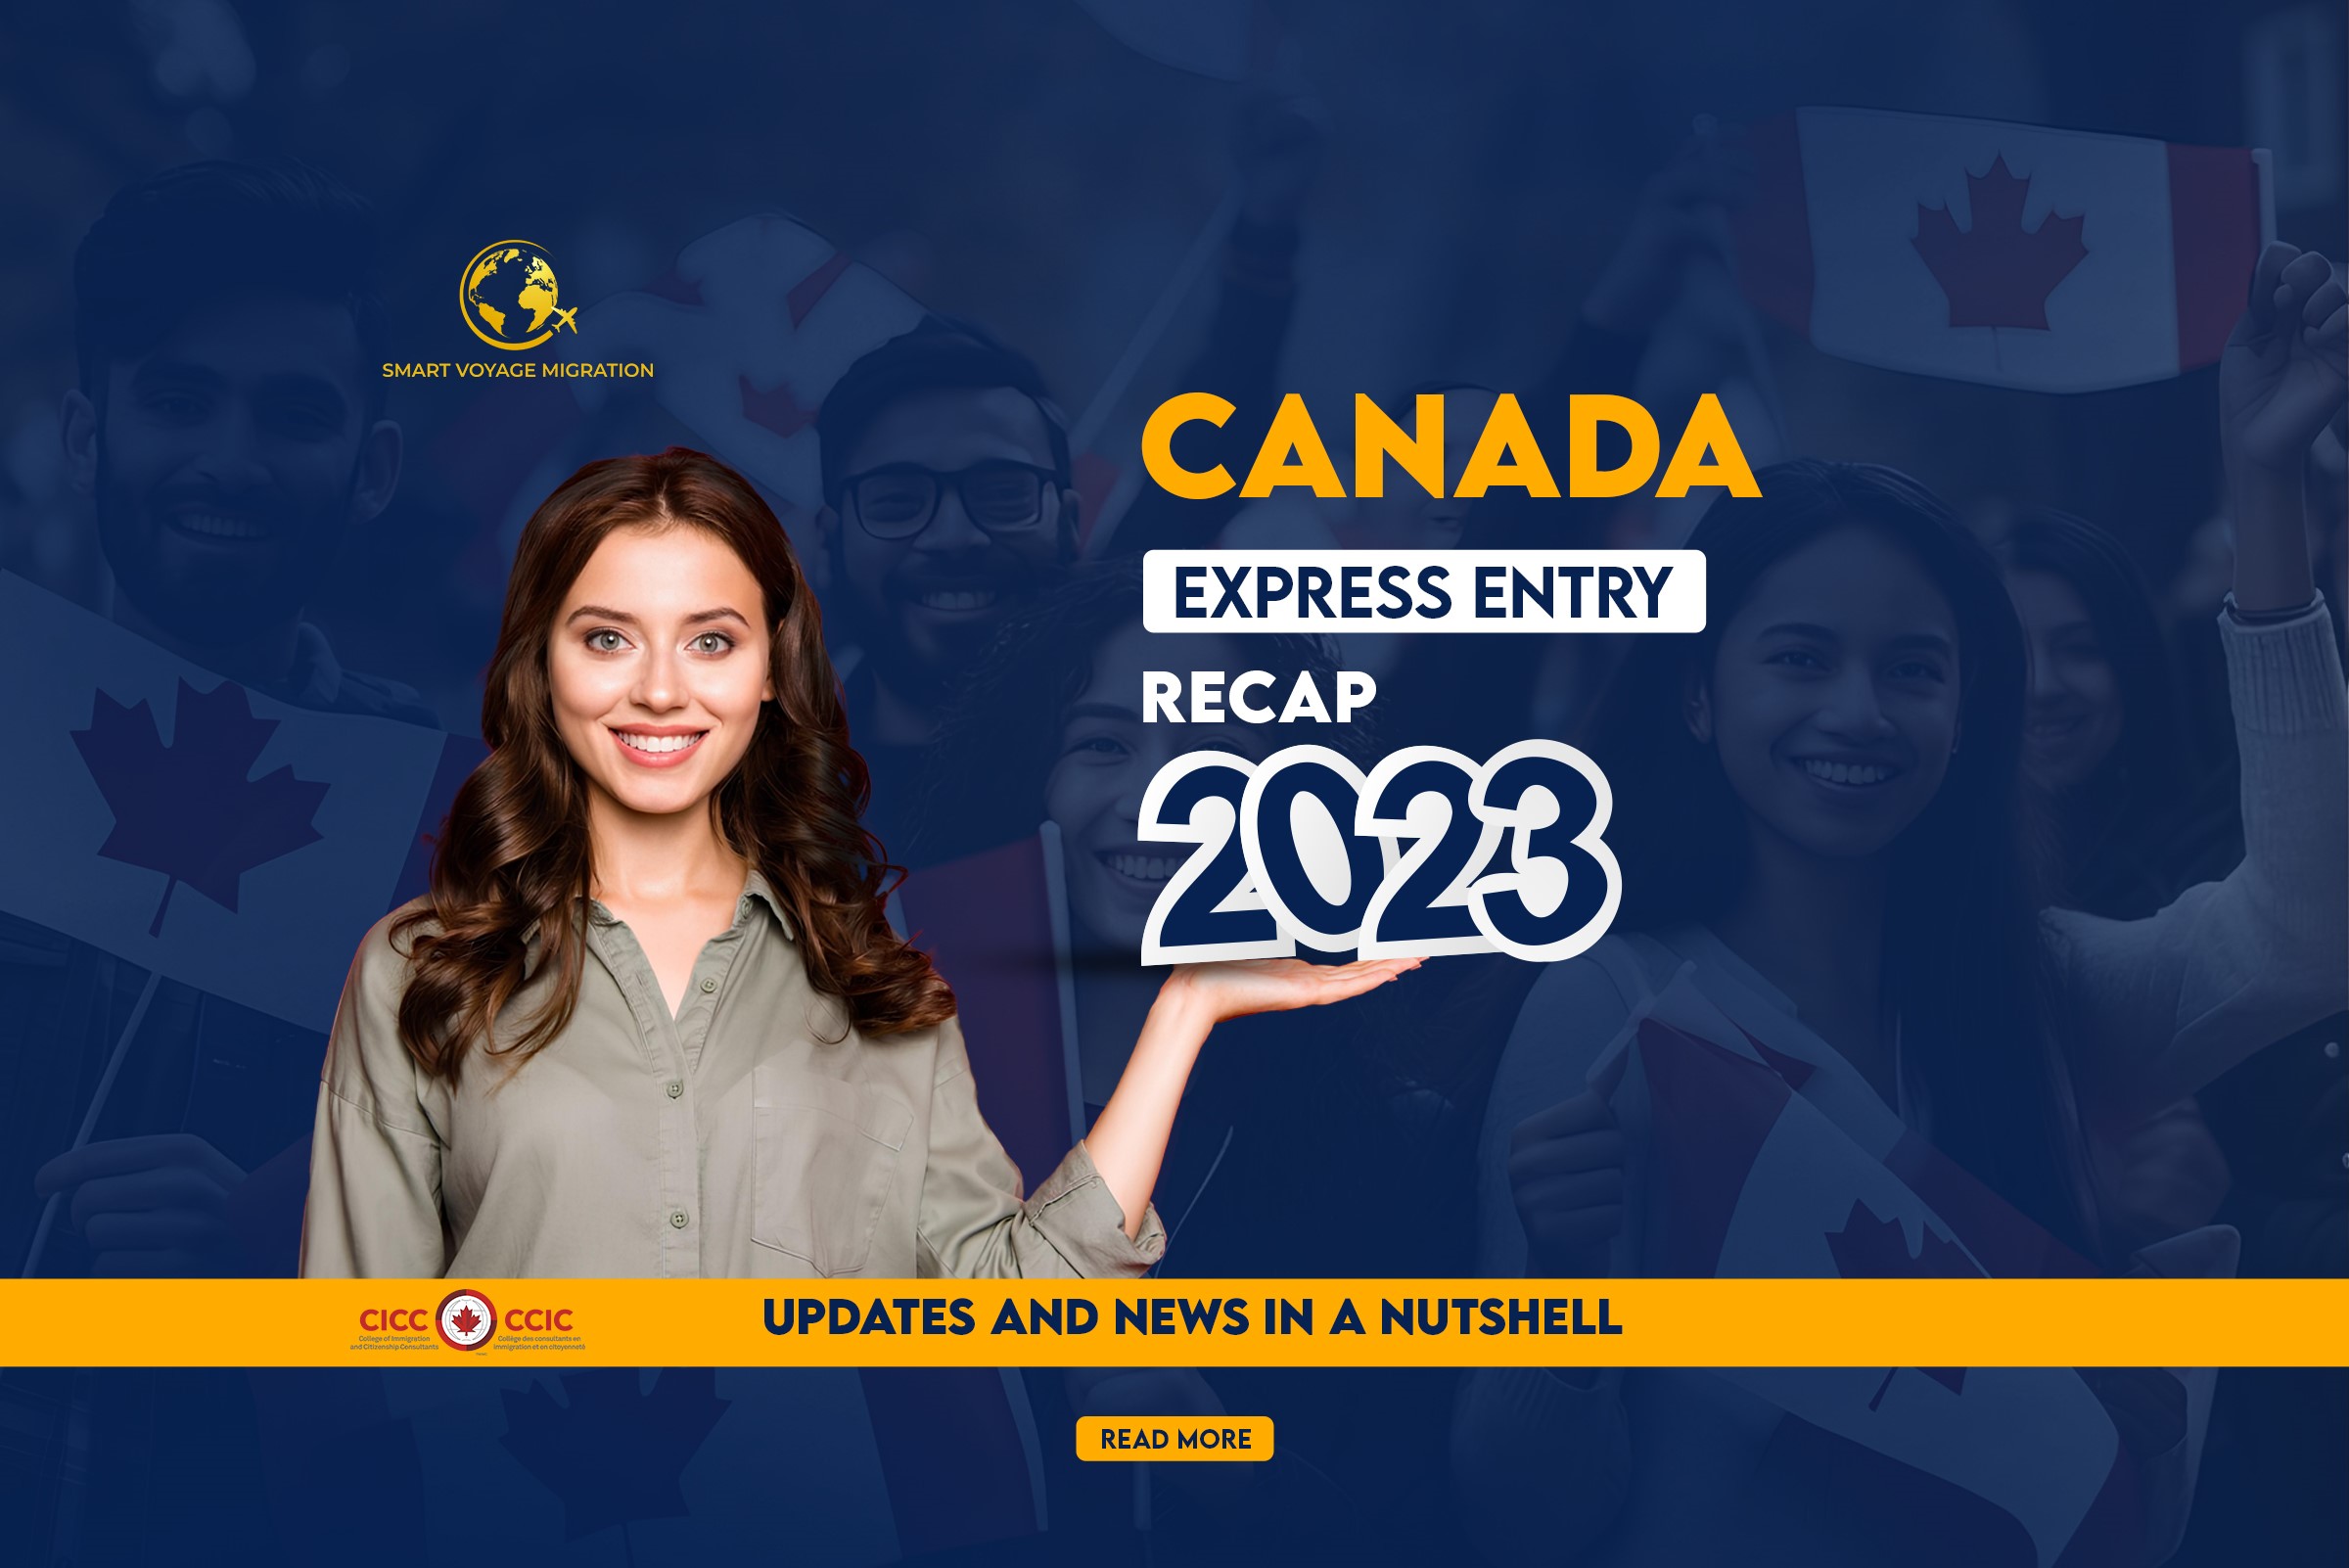 Canada Express Entry 2023 Recap: Complete Express entry updates and news of 2023 in a nutshell